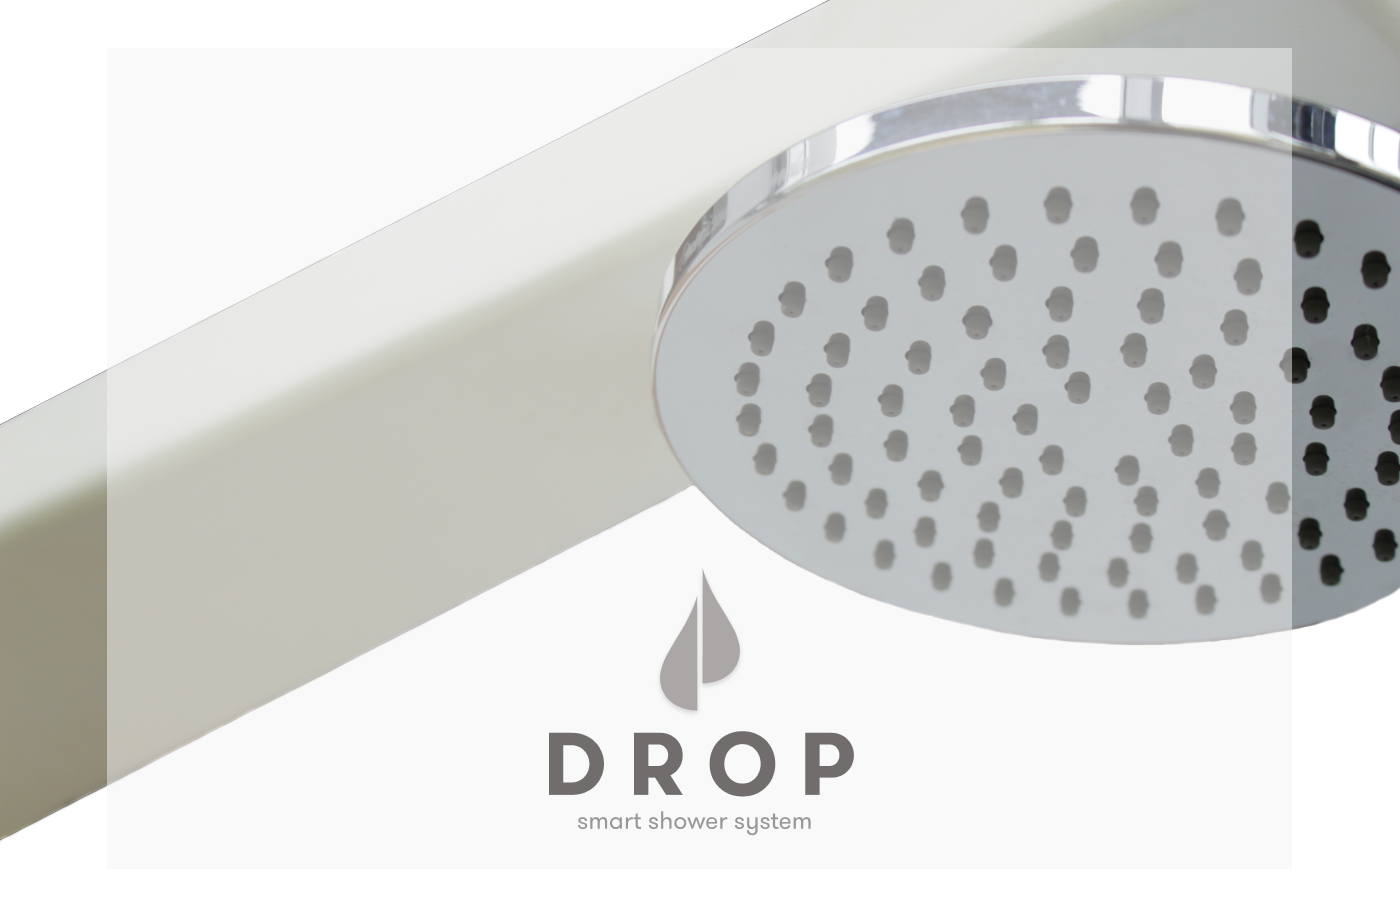 eco shower Producto inteligente smart product